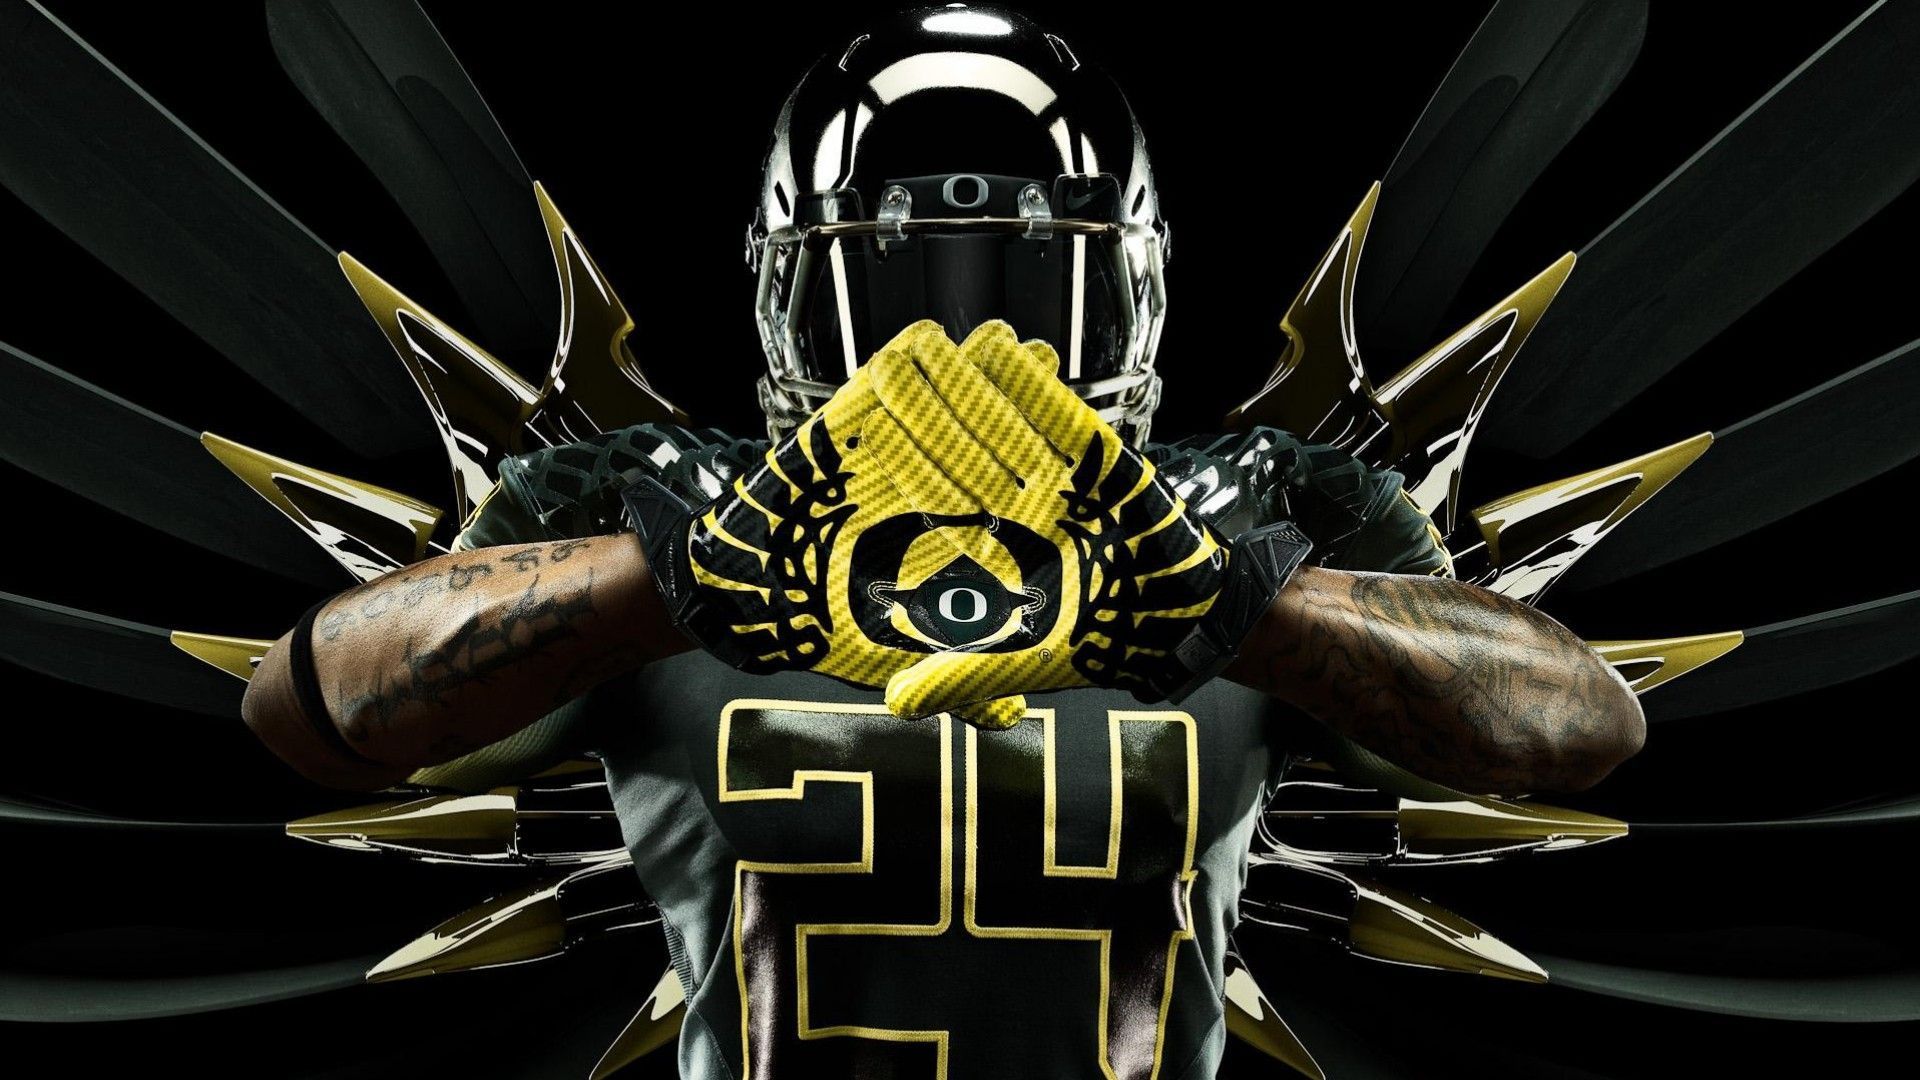 Oregon Ducks Wallpapers HD Free Download | Wallpapers, Backgrounds ...